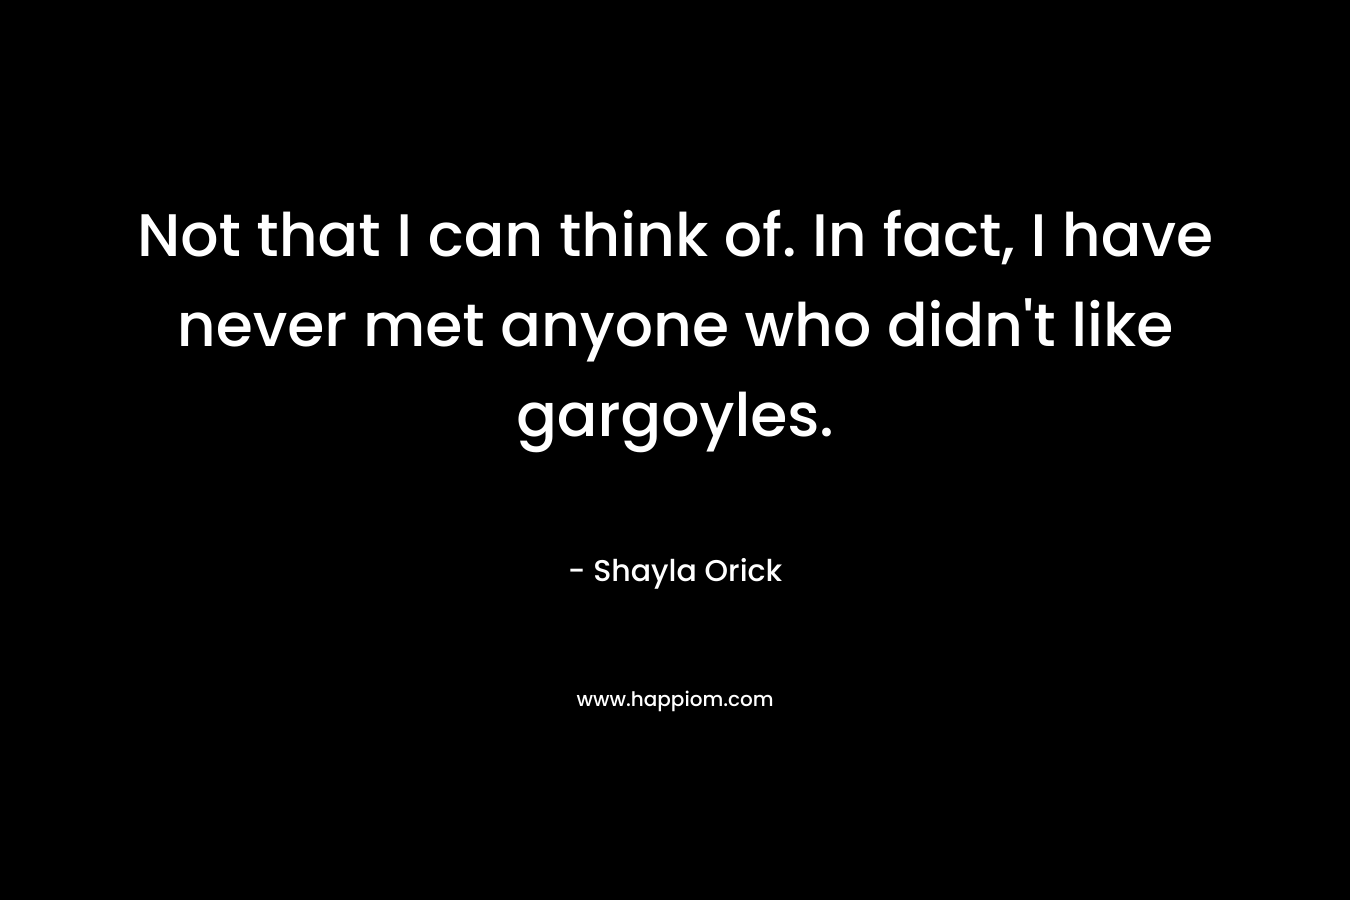 Not that I can think of. In fact, I have never met anyone who didn’t like gargoyles. – Shayla Orick